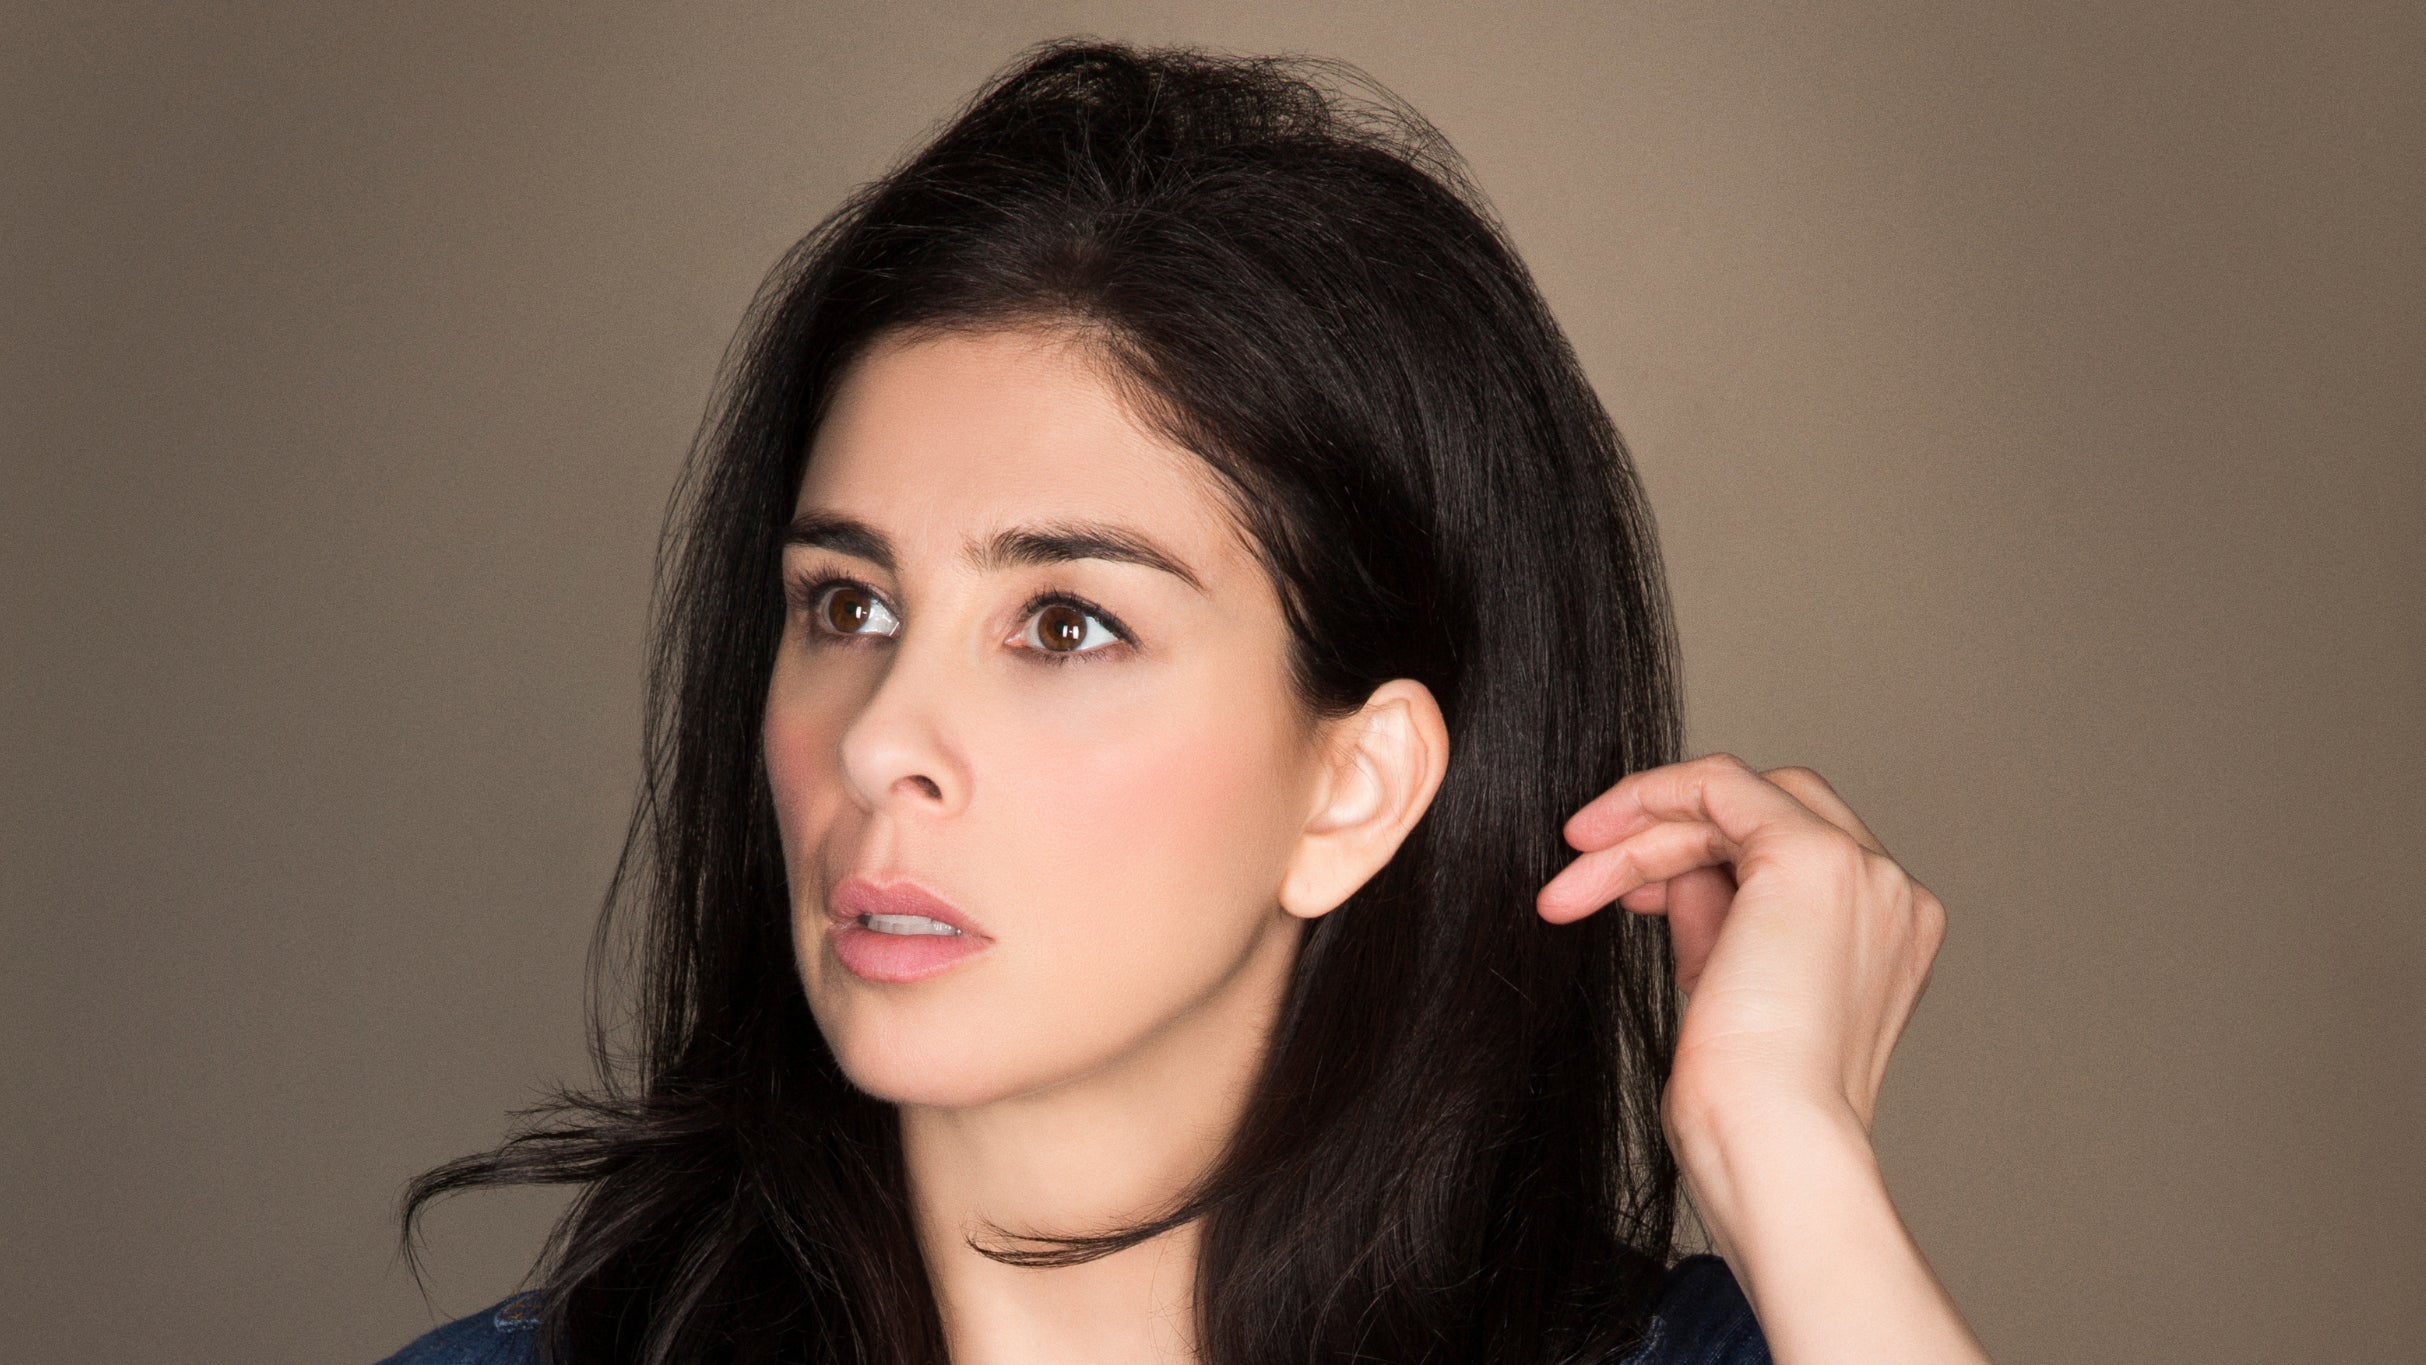 Netflix Is A Joke Presents: Sarah Silverman in Hollywood promo photo for Live Nation presale offer code